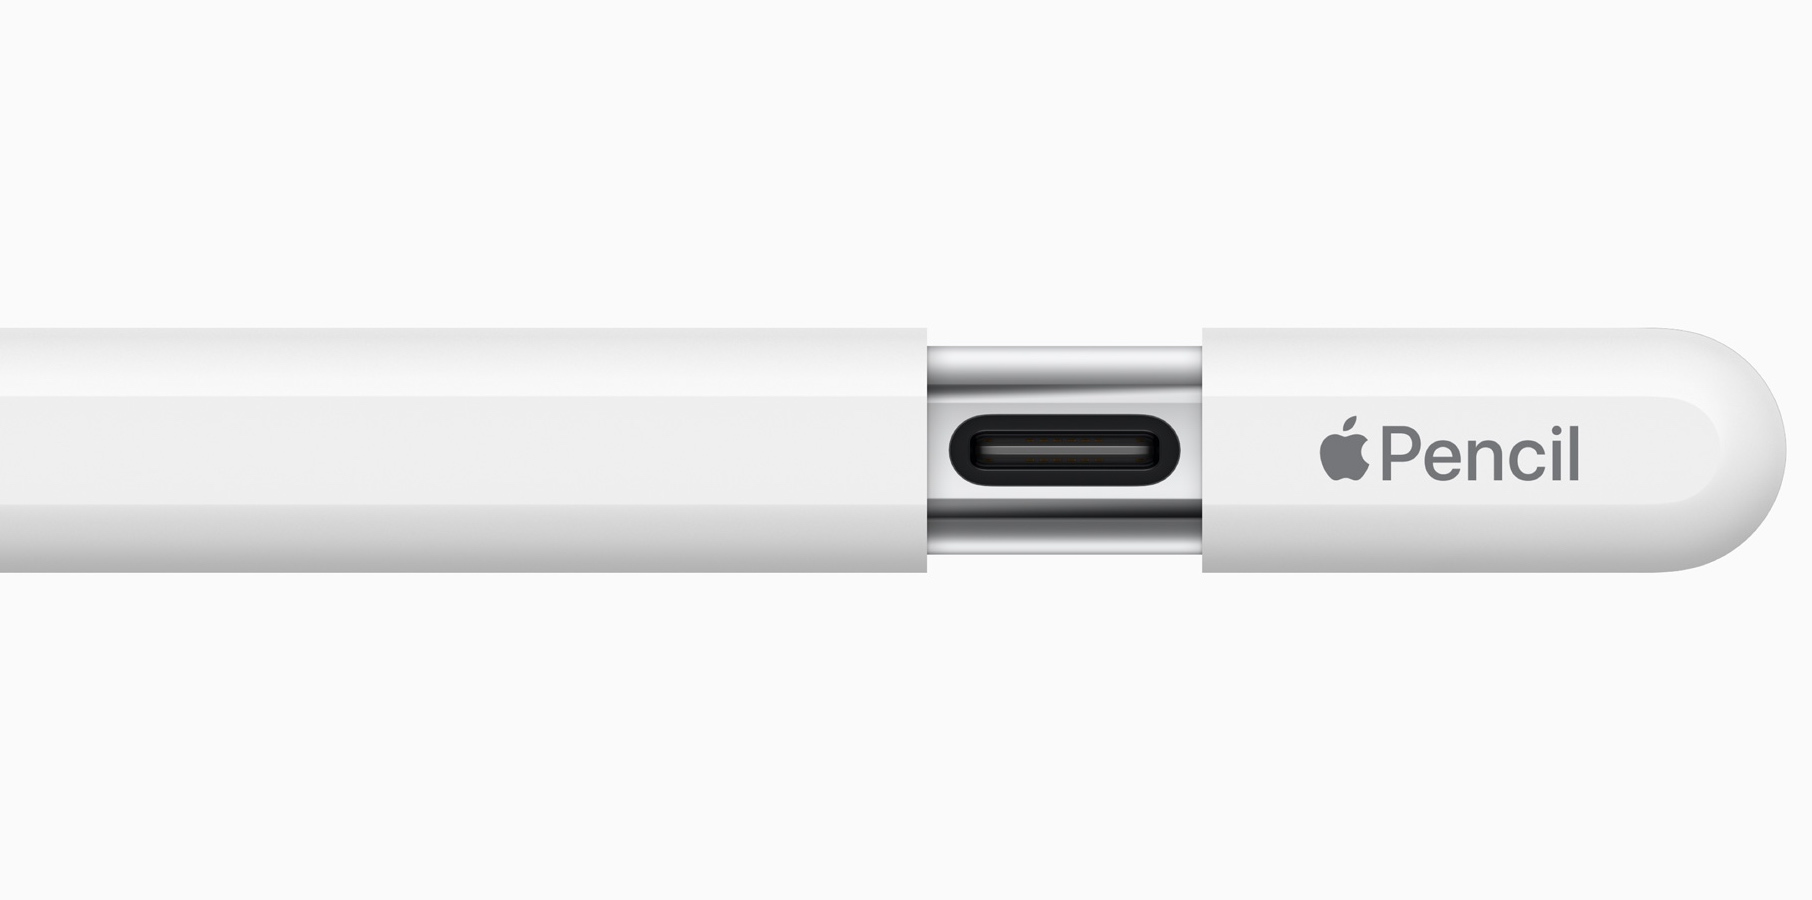 The USB-C Apple Pencil fixes the iPad charging issue people 